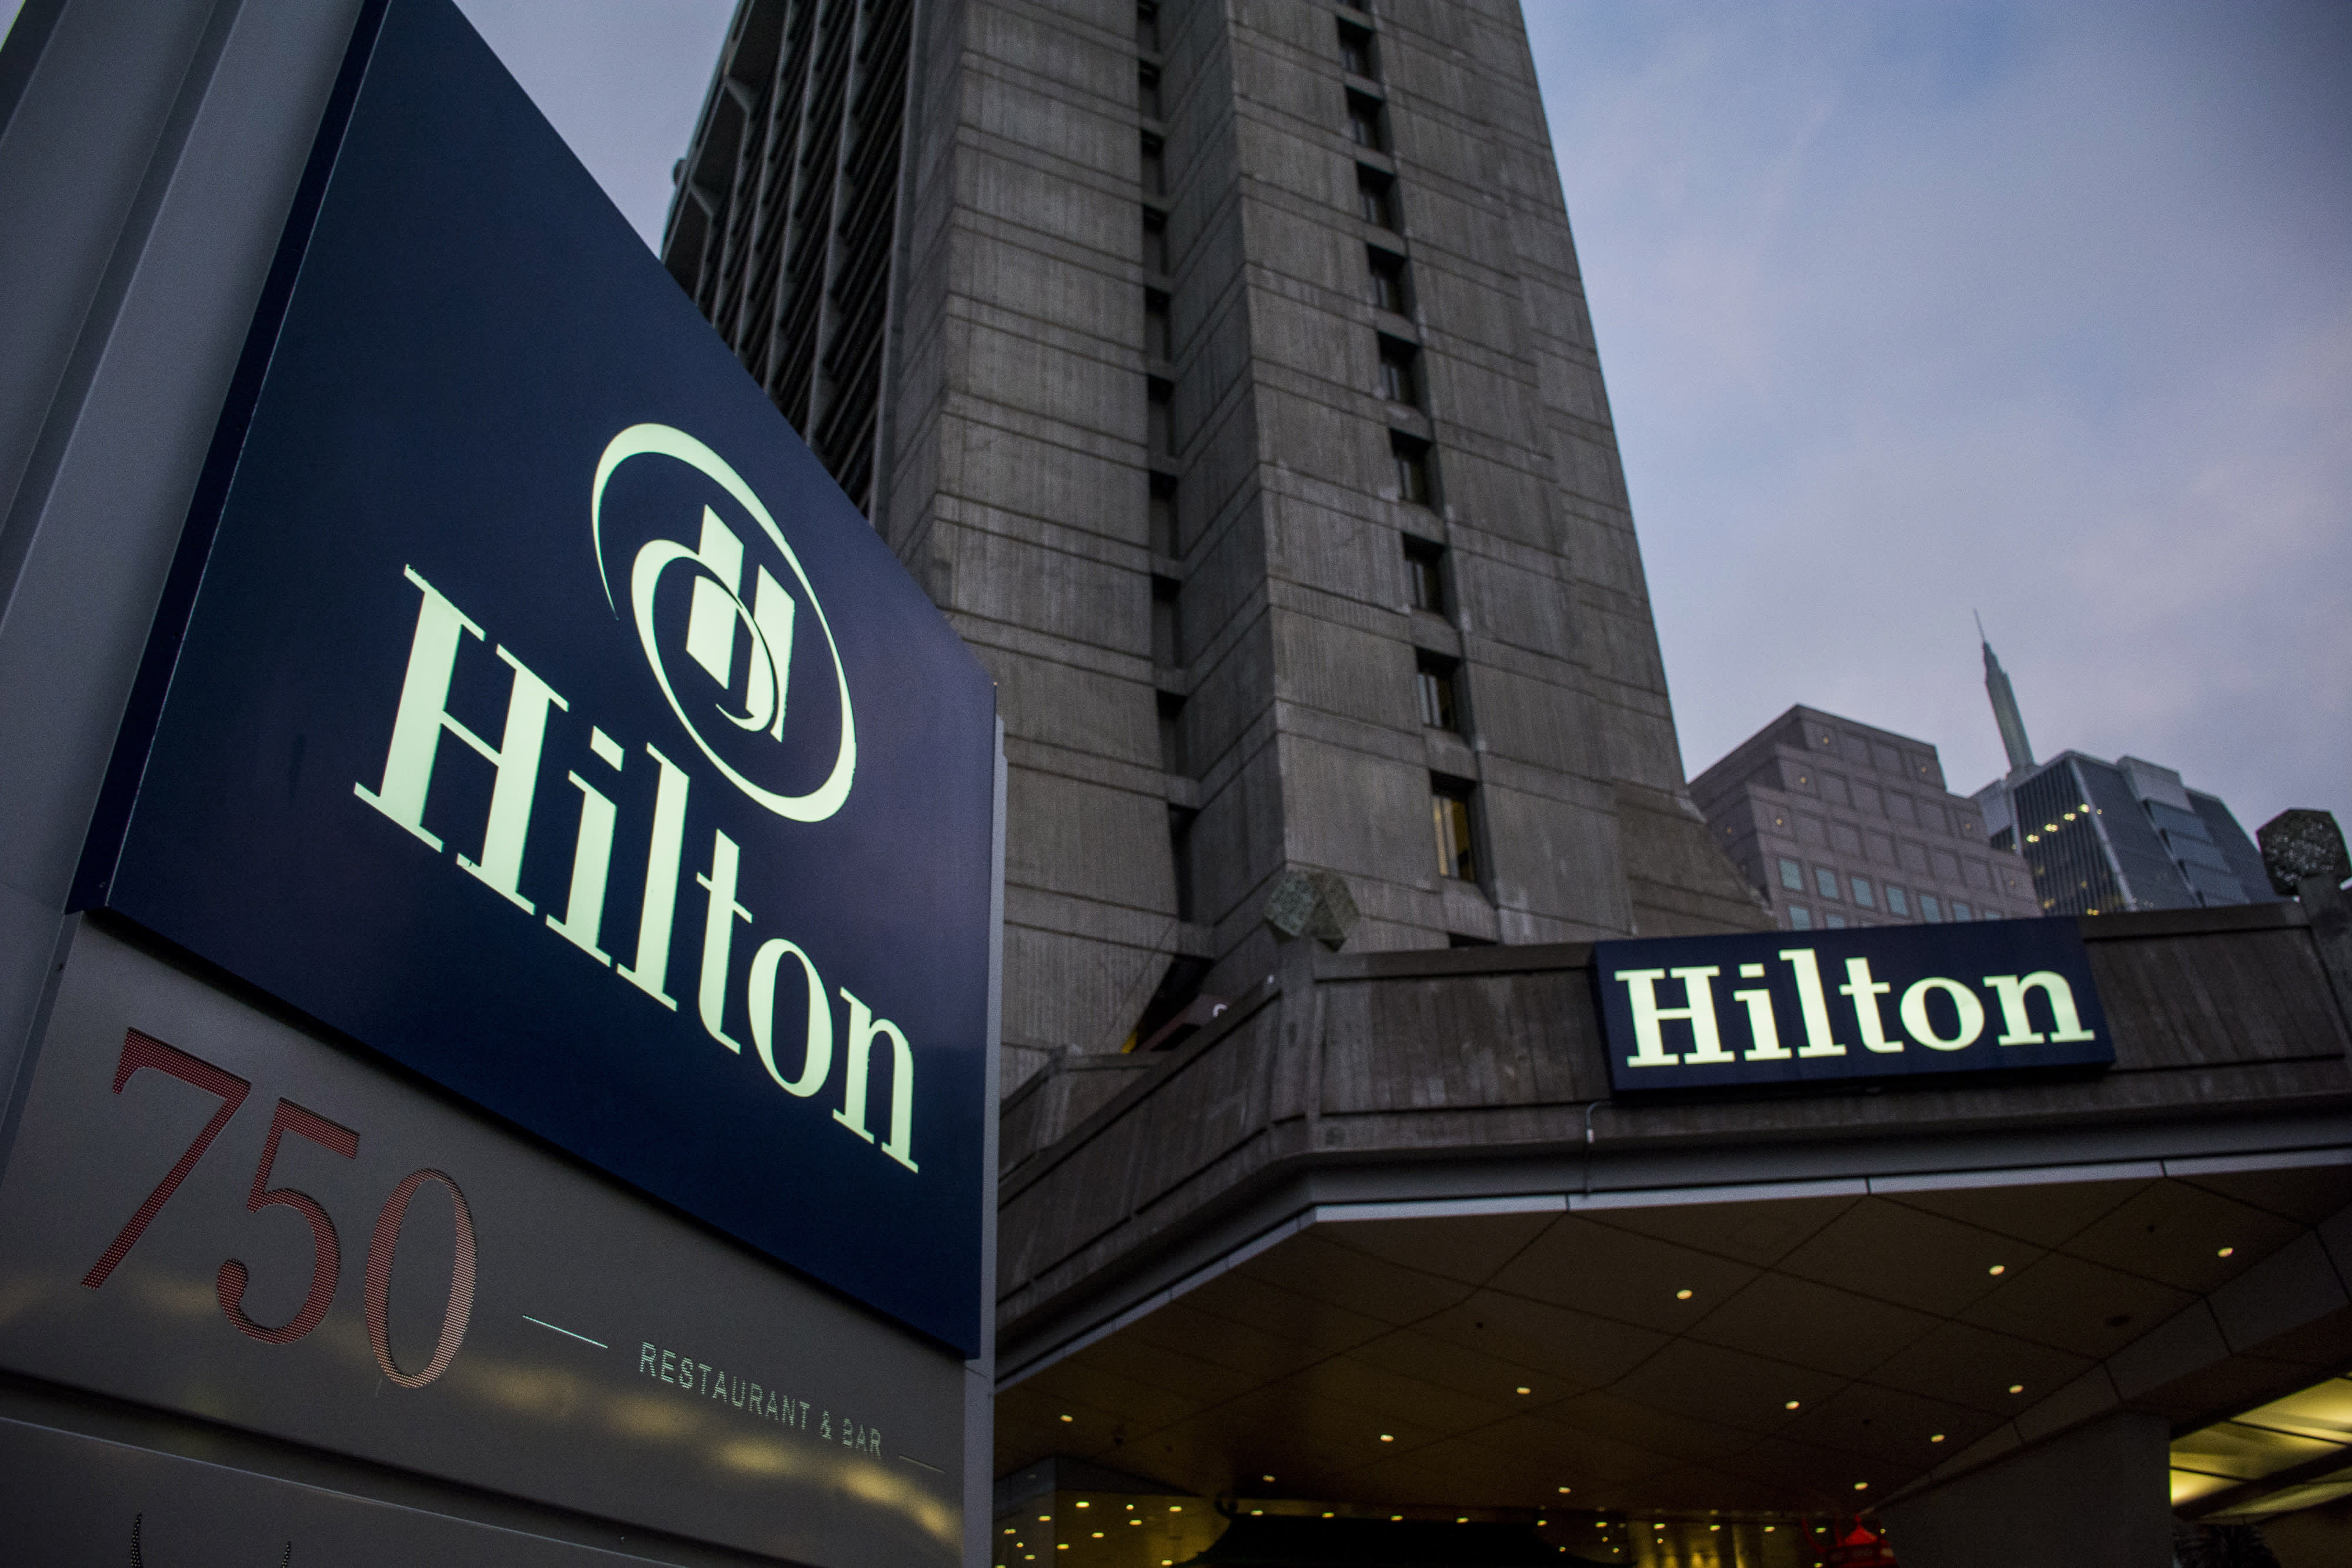 Hilton CEO: Business travel is back to about 50% of pre-Covid levels, but some markets are stronger